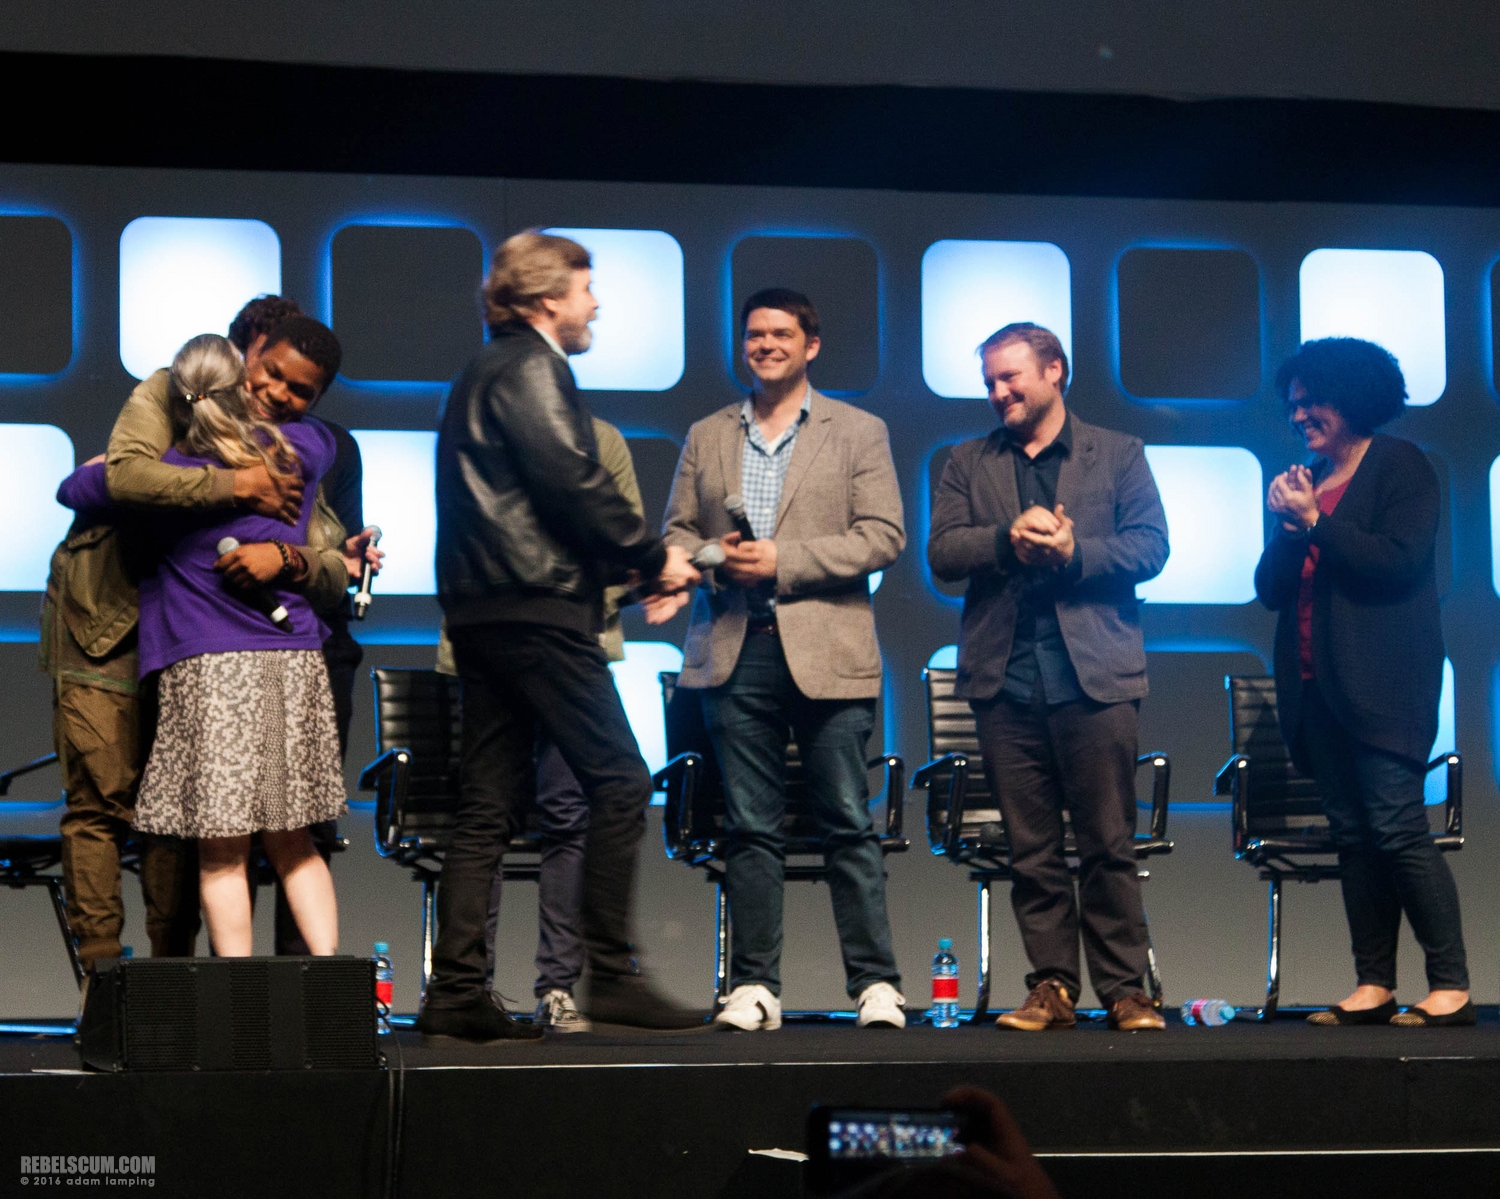 star-wars-celebration-2016-future-filmmakers-and-closing-ceremony-020.jpg